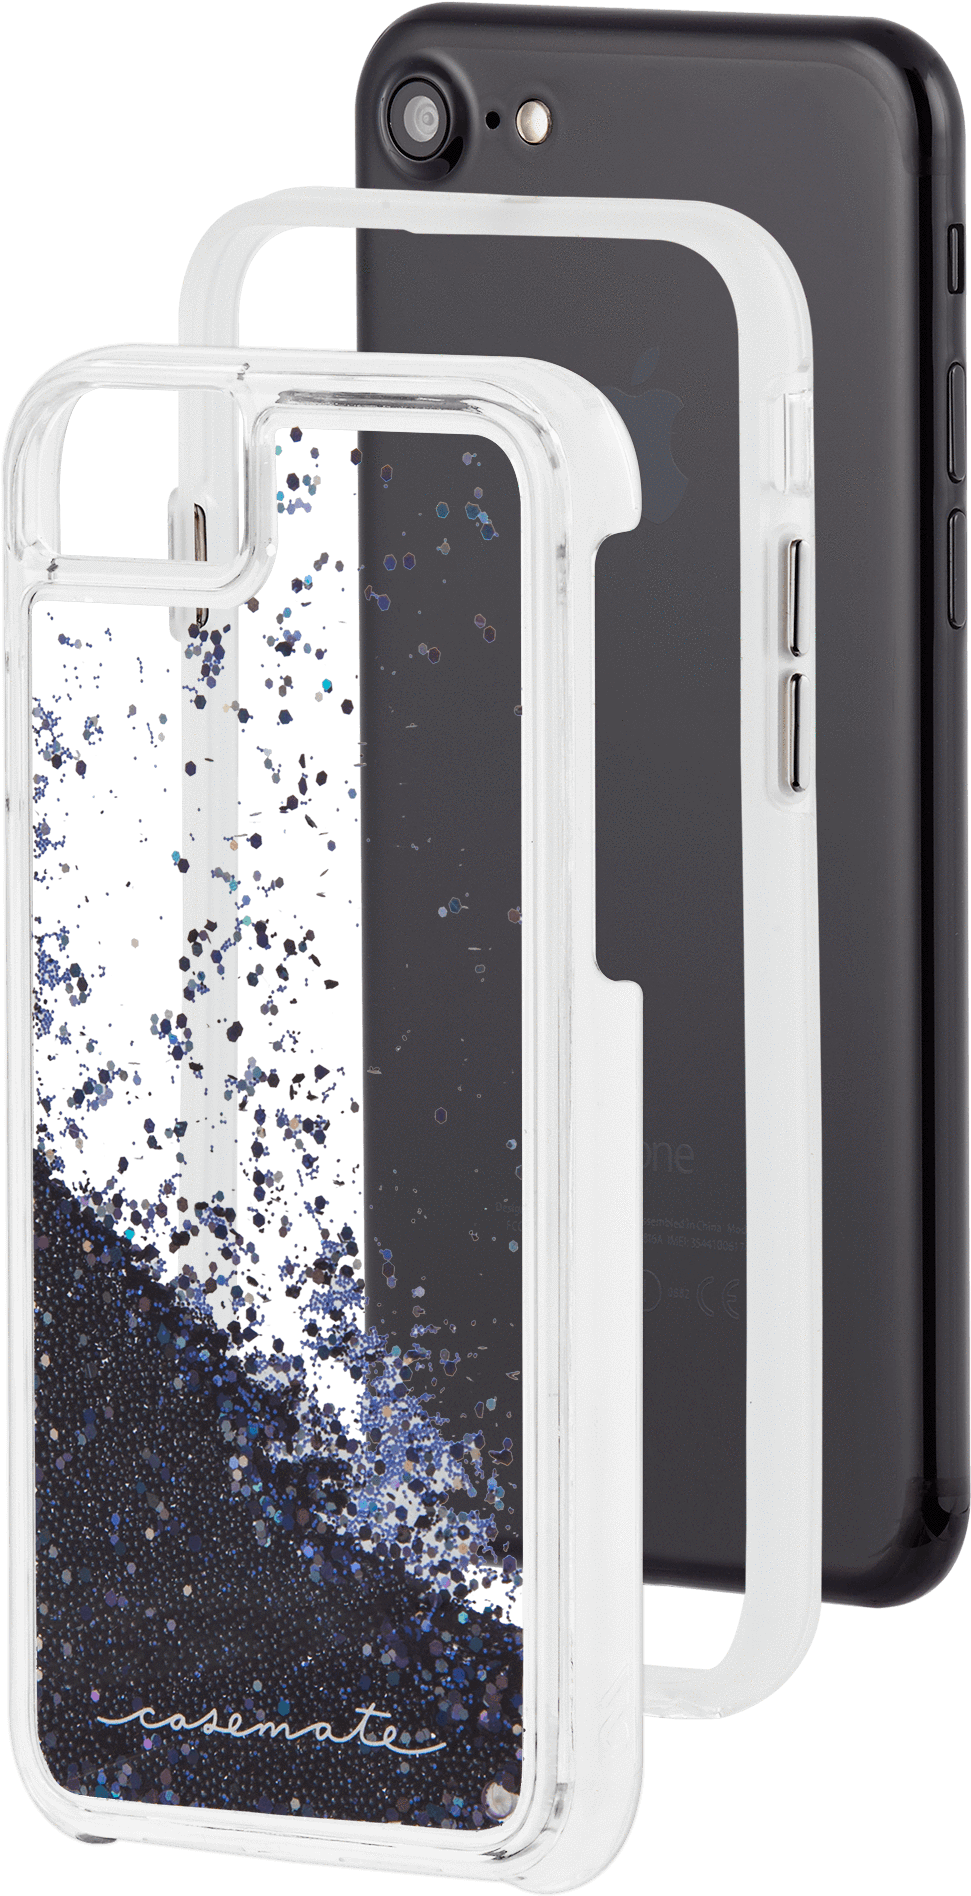 Case Mate Waterfall Protective Case For Iphone 8/7/6s - Apple Iphone 6 / Iphone 6s / Iphone 7 Case-mate Waterfall (2000x2000)